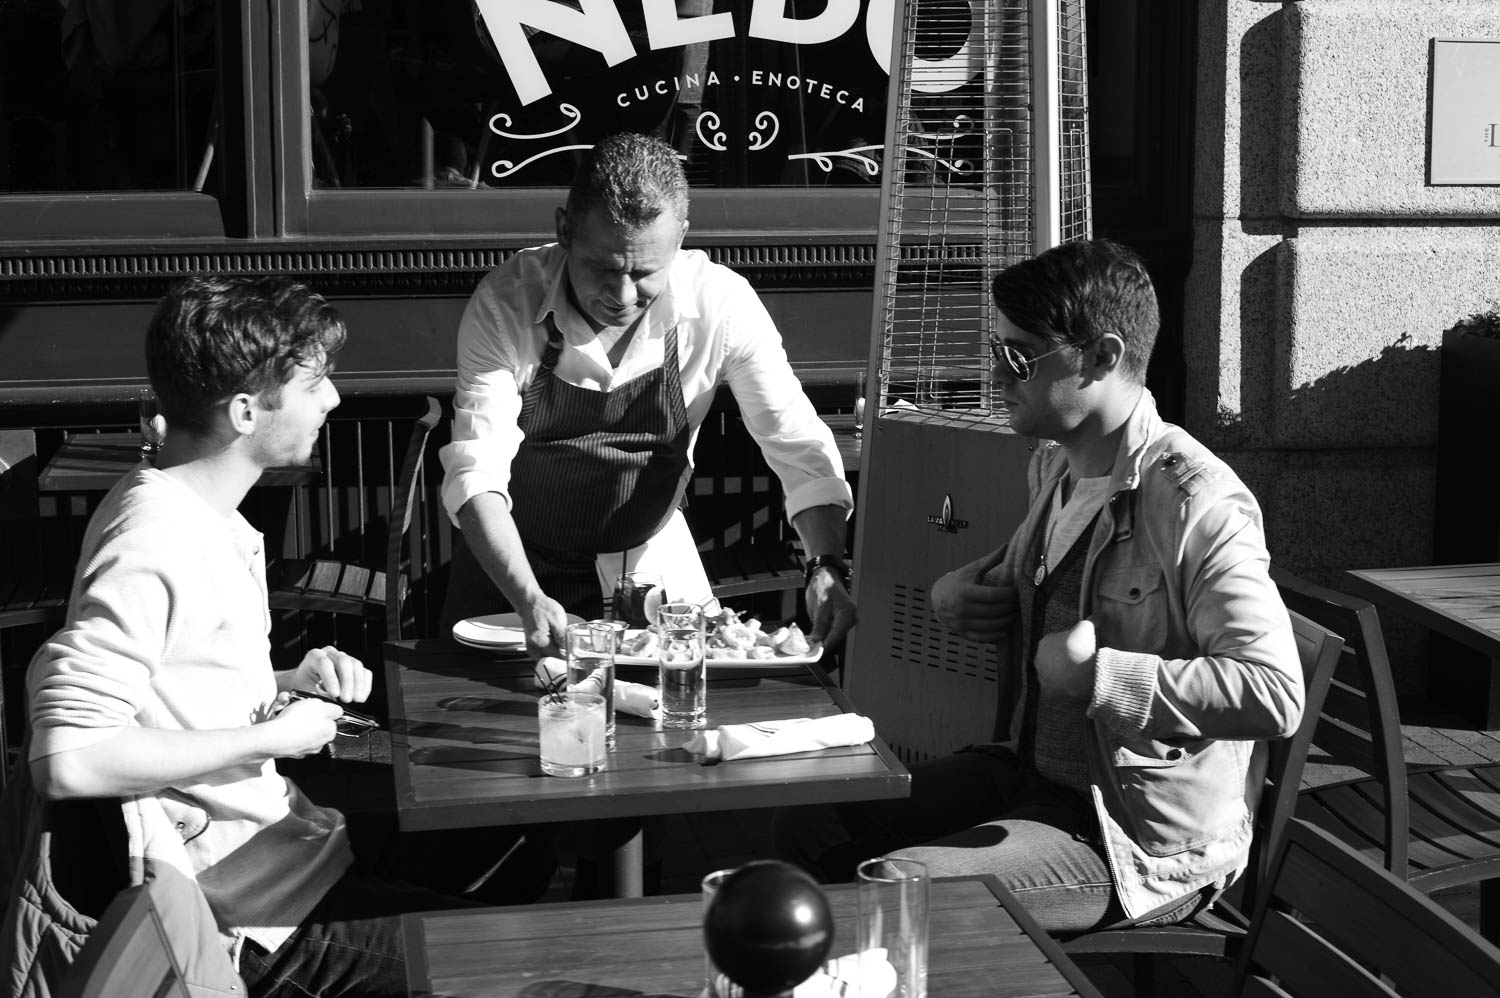 A waiter serves two men at an outdoor table in Boston